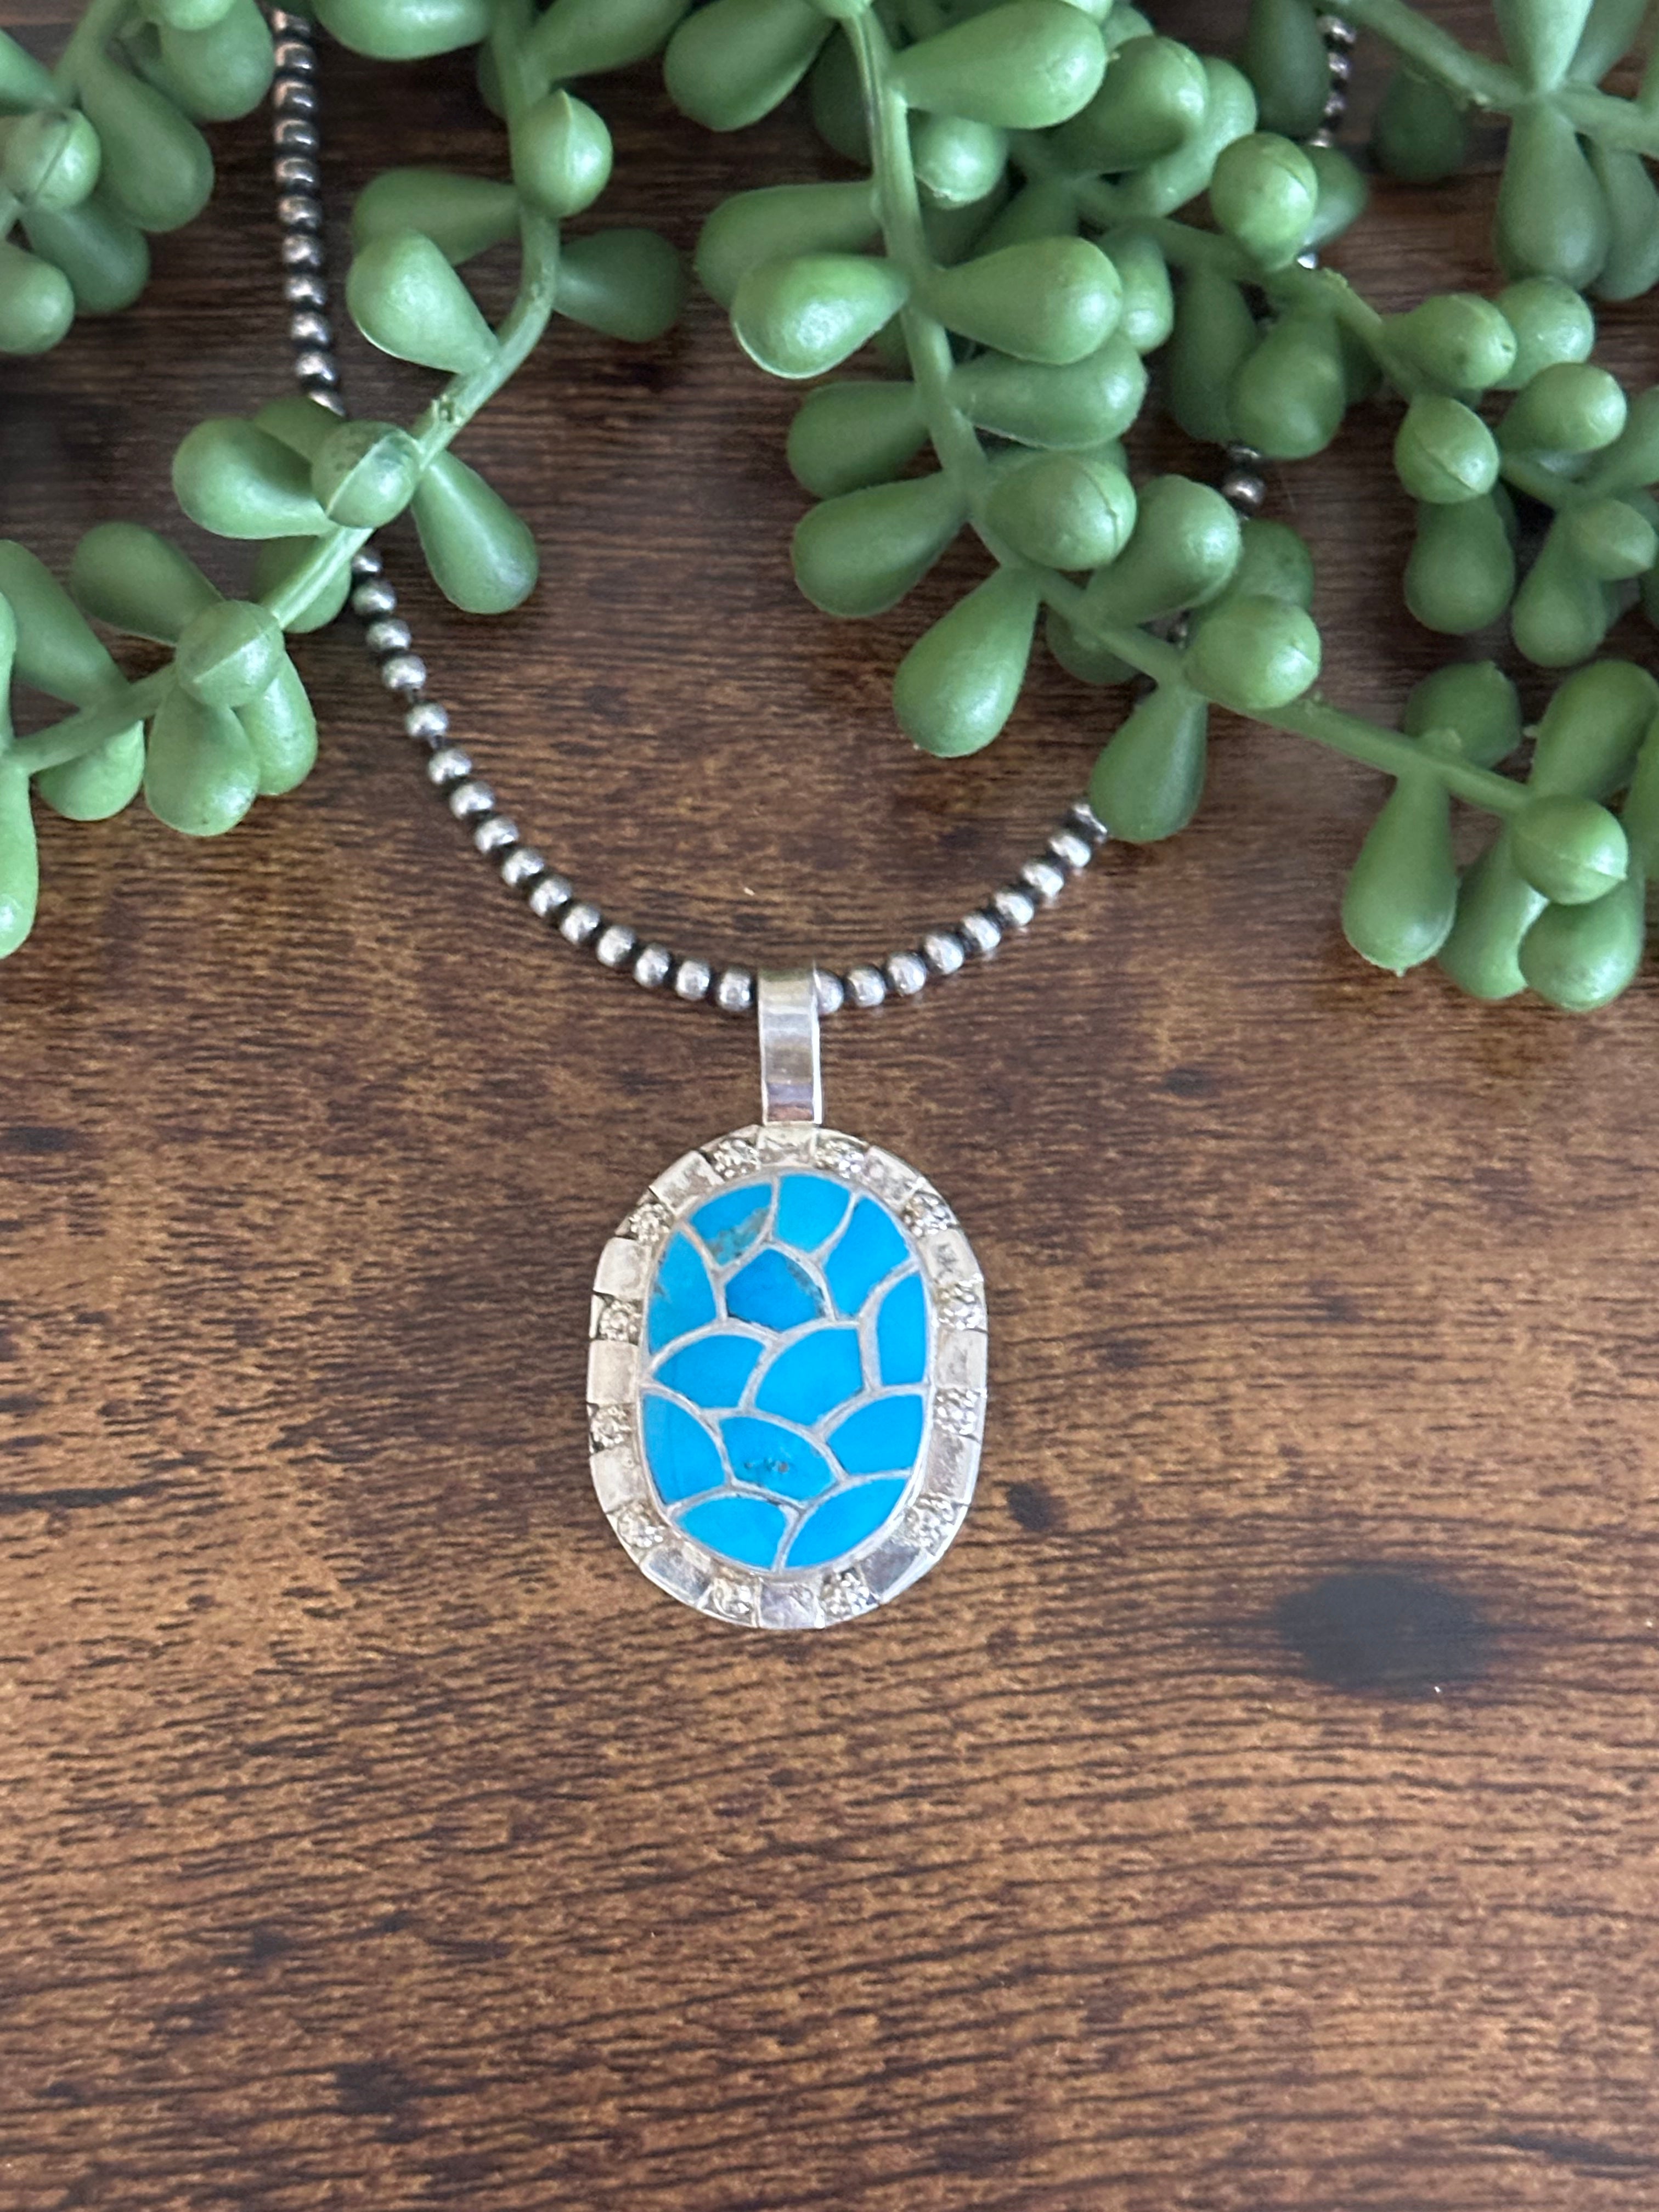 Zuni Handmade Turquoise & Sterling Silver Inlay Pendant